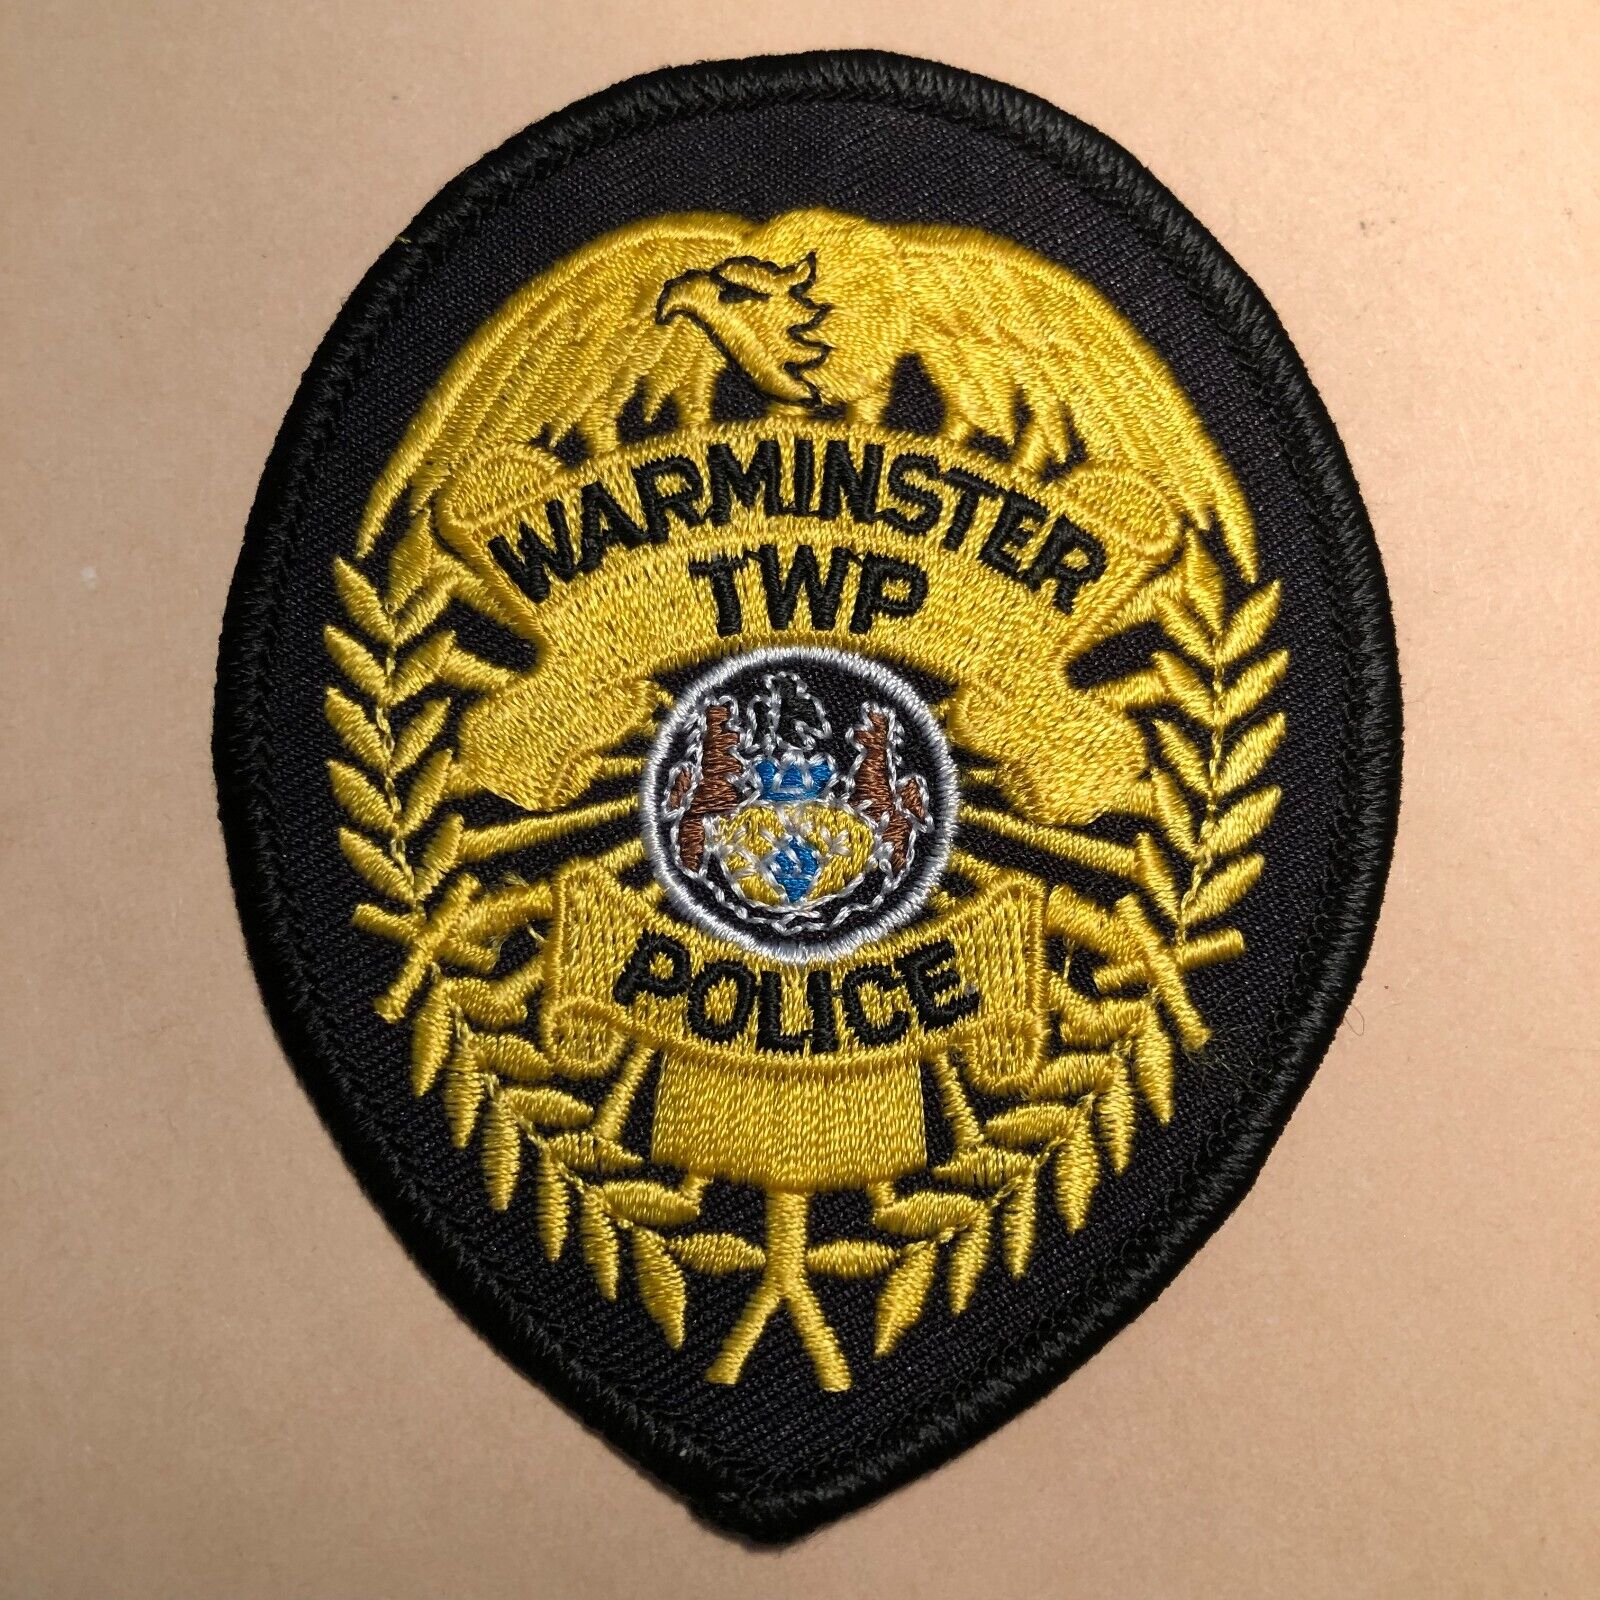 Warminster TWP Police Patch Pennsylvania.